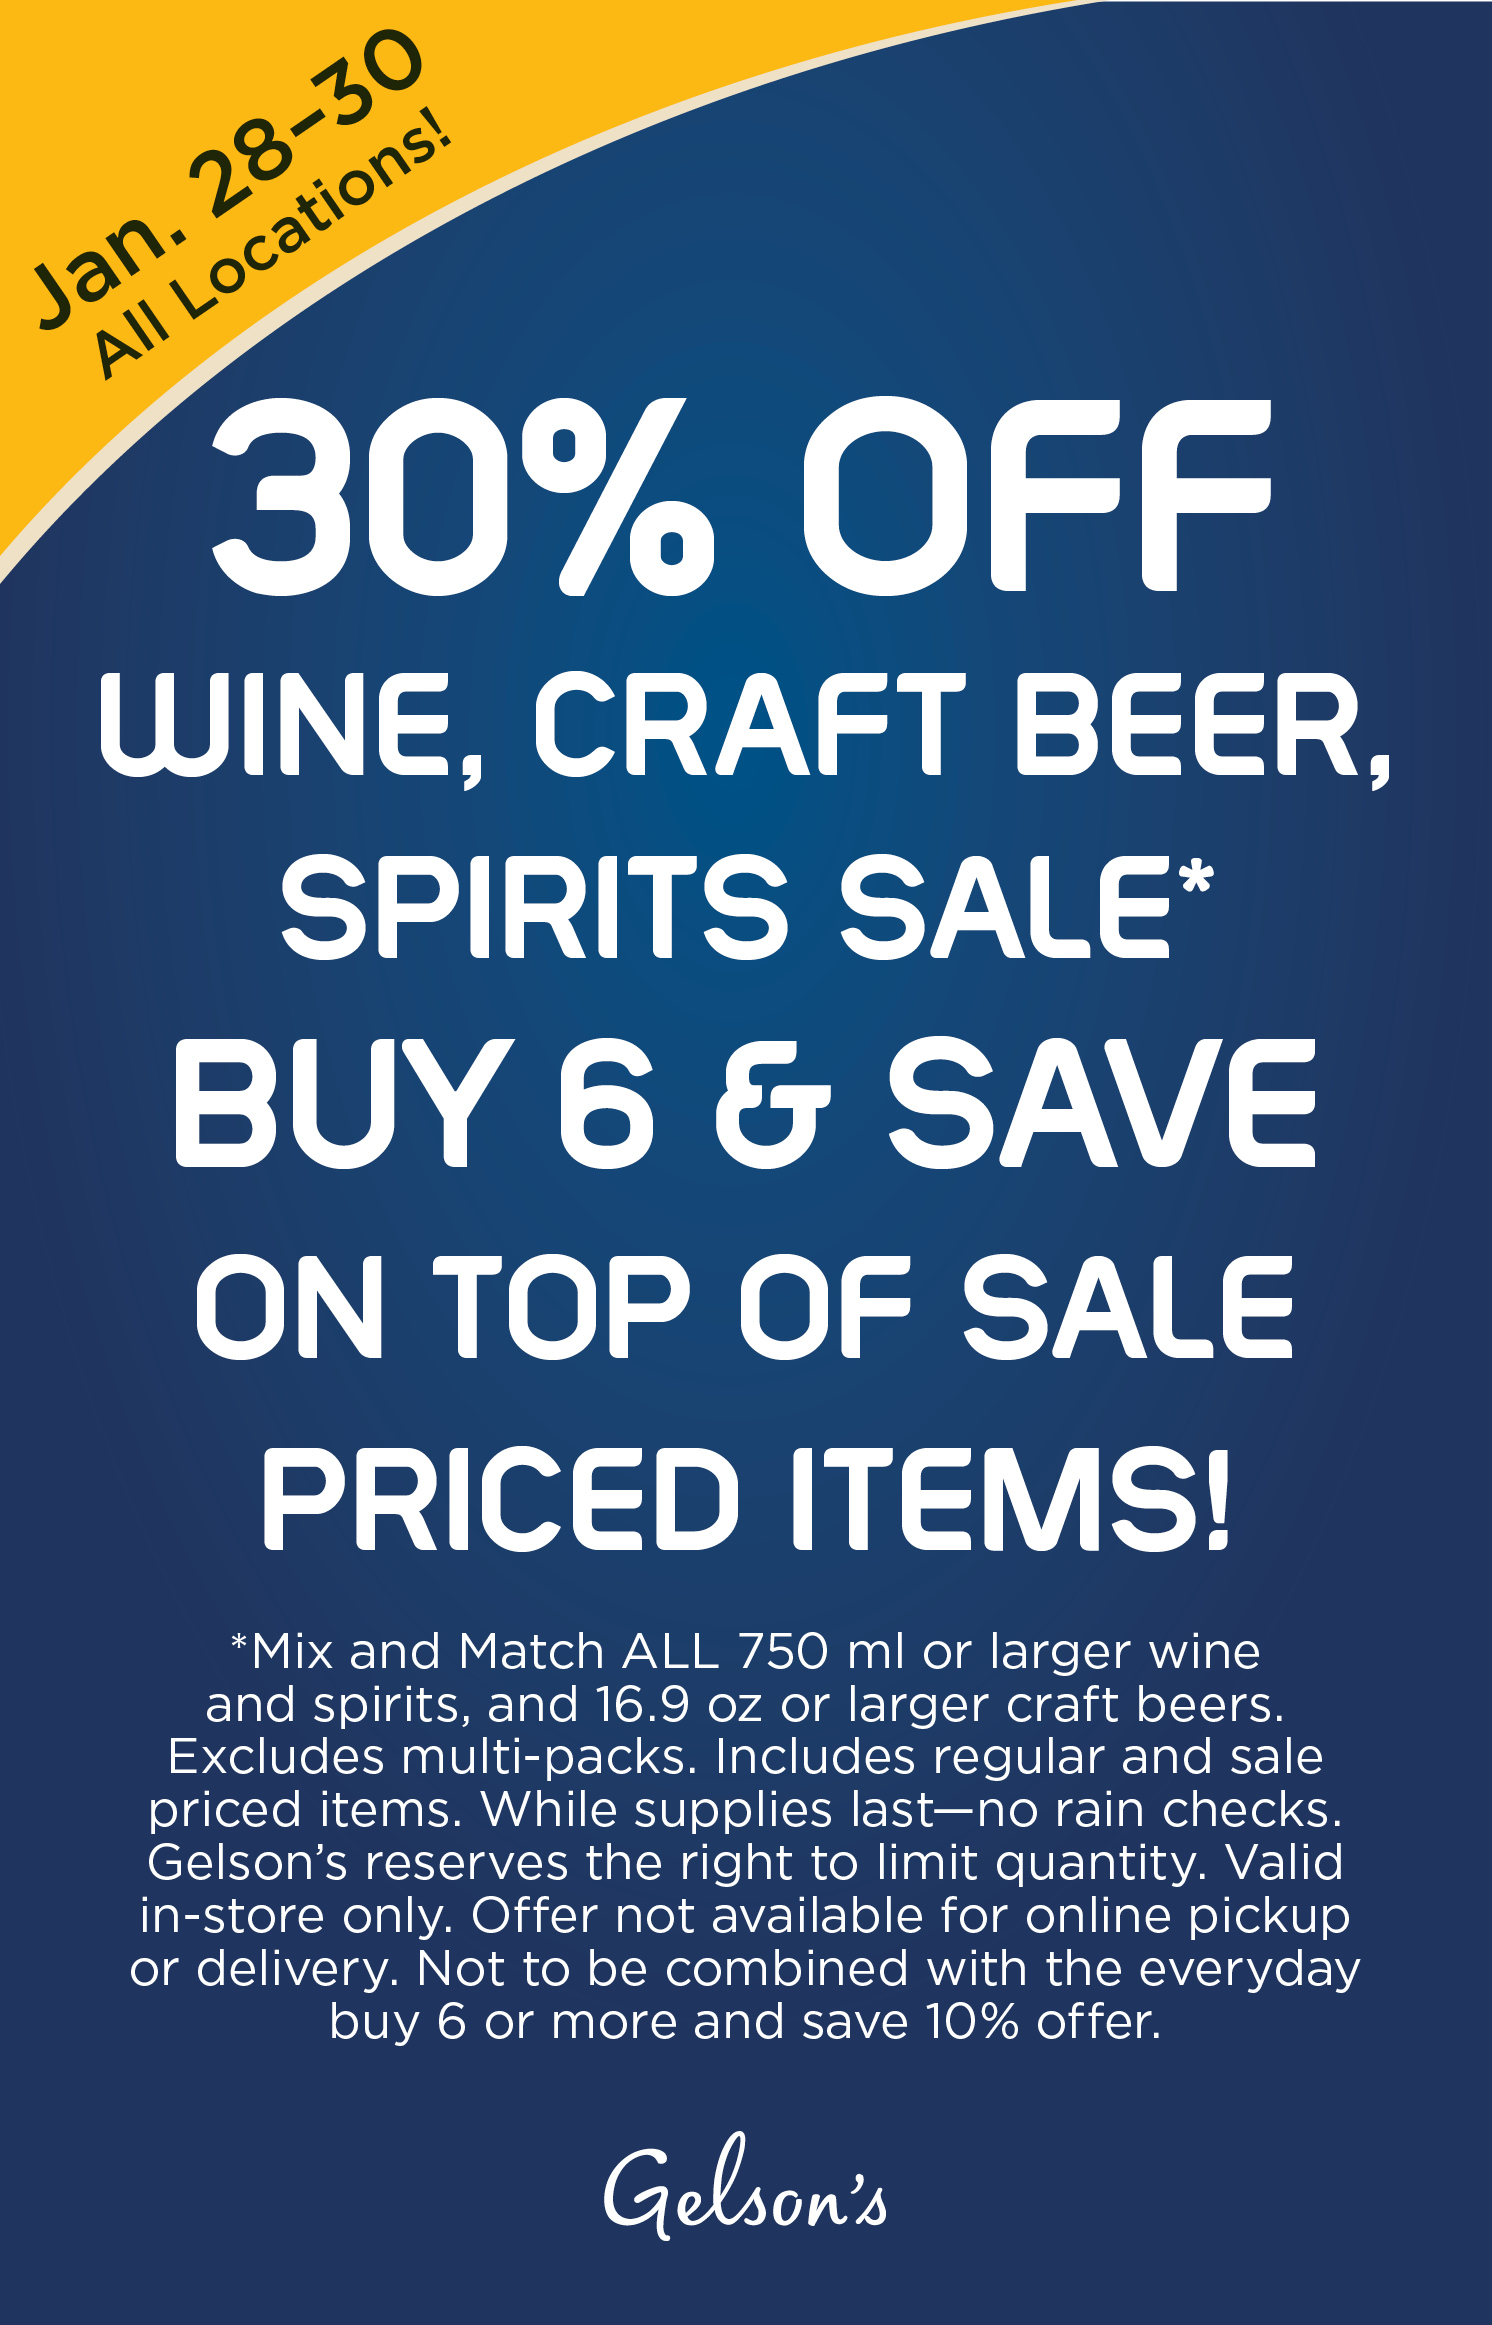 This Weekend! Enjoy our 30% Off Wine, Beer, Spirits Sale! Mix and Match ALL 750 ml or larger wine and spirits, and 16.9 oz or larger craft beers. Excludes multi-packs. Includes regular and sale priced items. While supplies last - no rain checks. Gelson's reserves the right to limit quantity. Valid in-store only. Offer not available for online pickup or delivery. Not to be combined with the everyday buy 6 or more and save 10% offer. All locations between January 28-30, 2022.